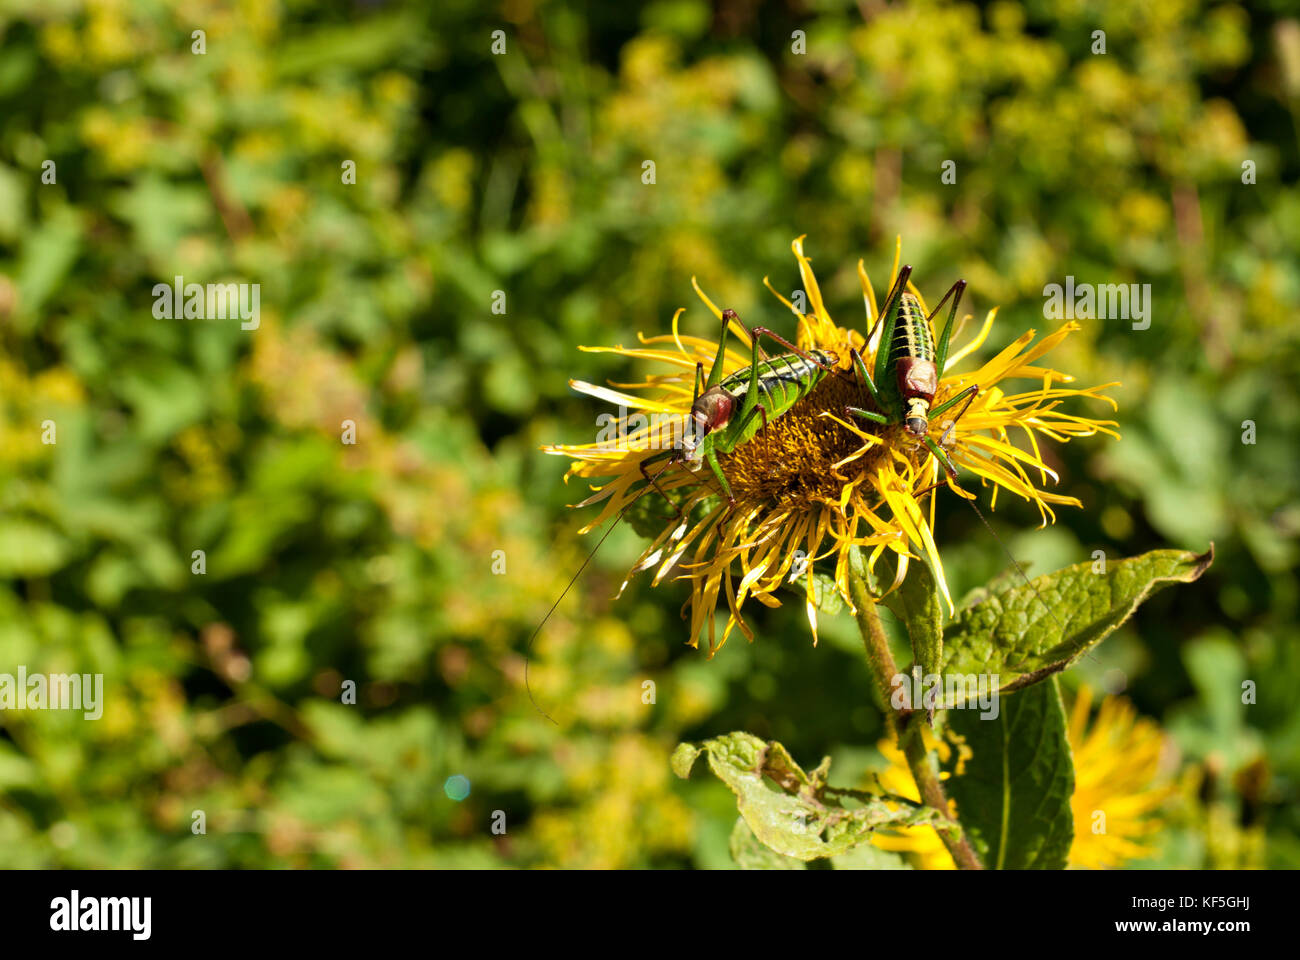 a pair of grasshoppers on a overblown flower of elecampane (also called horse-heal, alanroot or elfdock) closeup on a blurred background Stock Photo